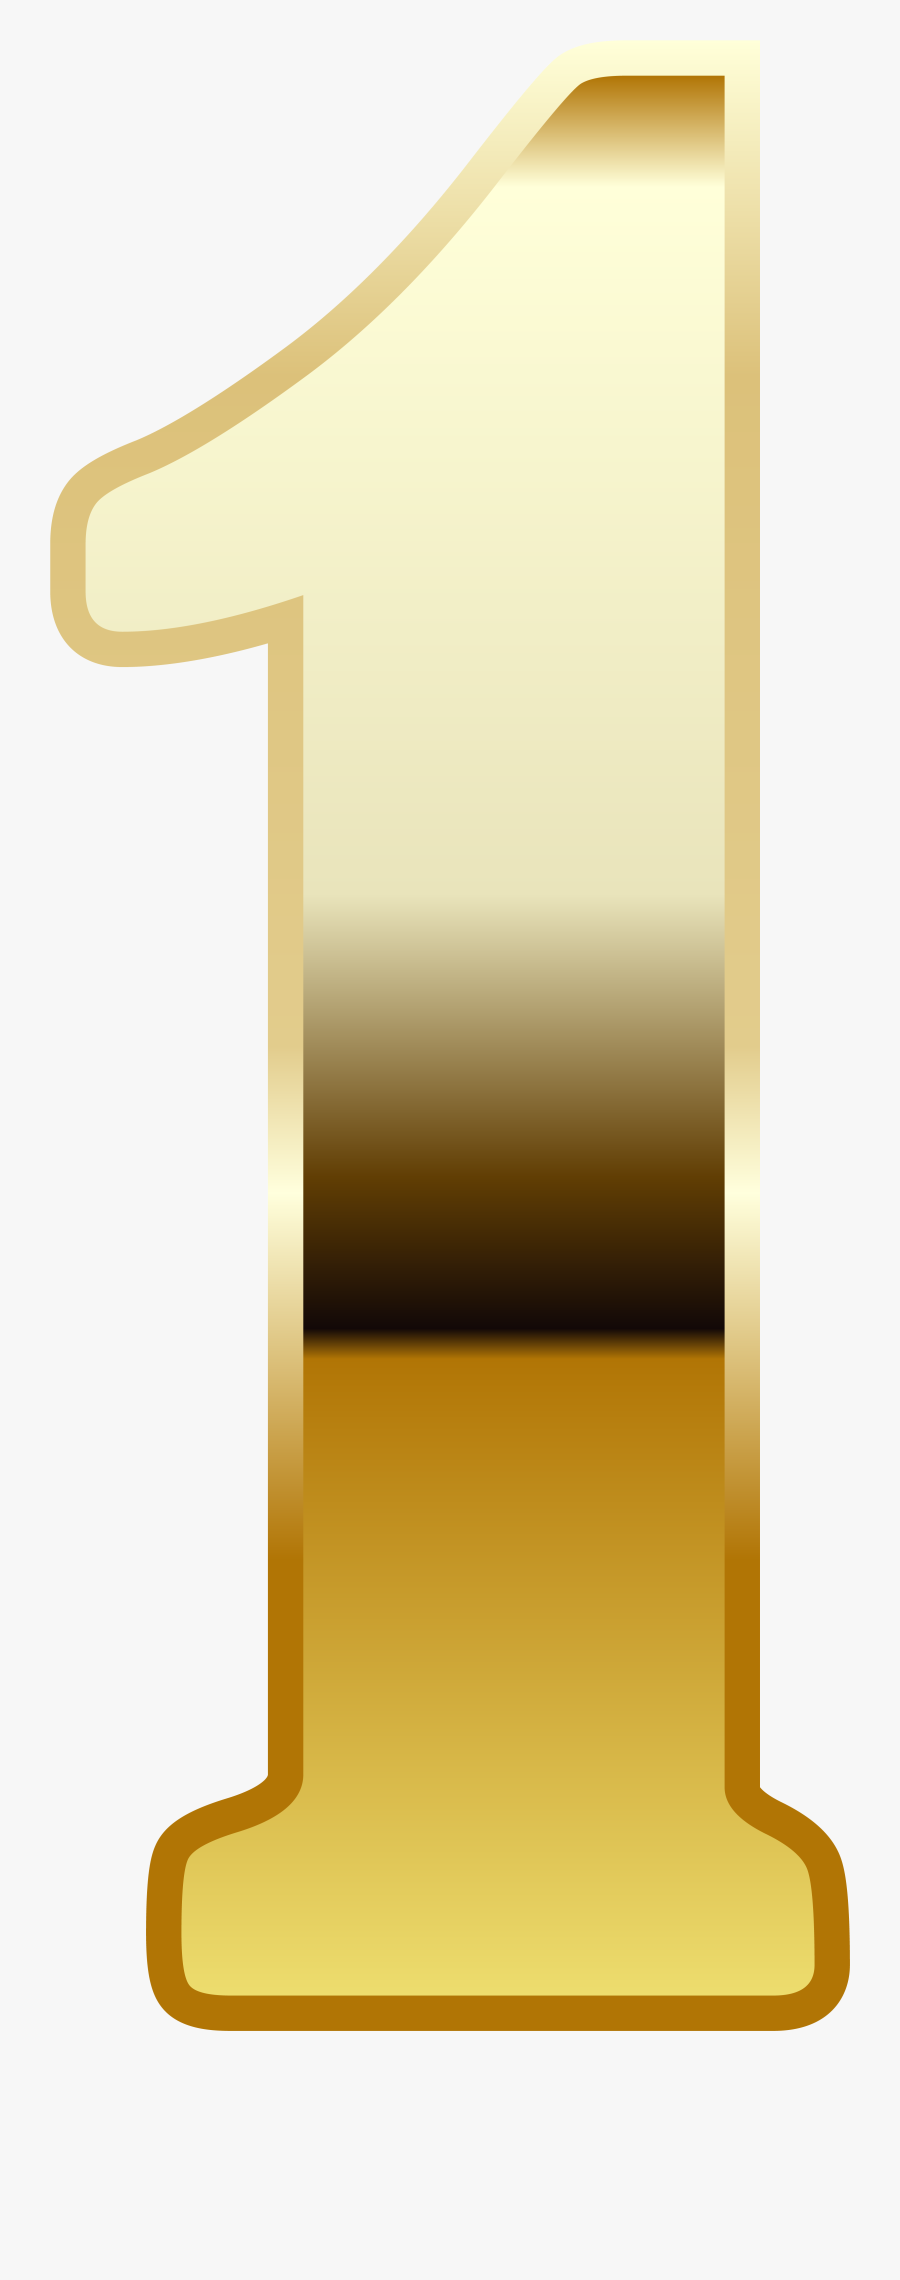 Collection Of Gold Number High Quality Ⓒ - Gold Number One Png, Transparent Clipart